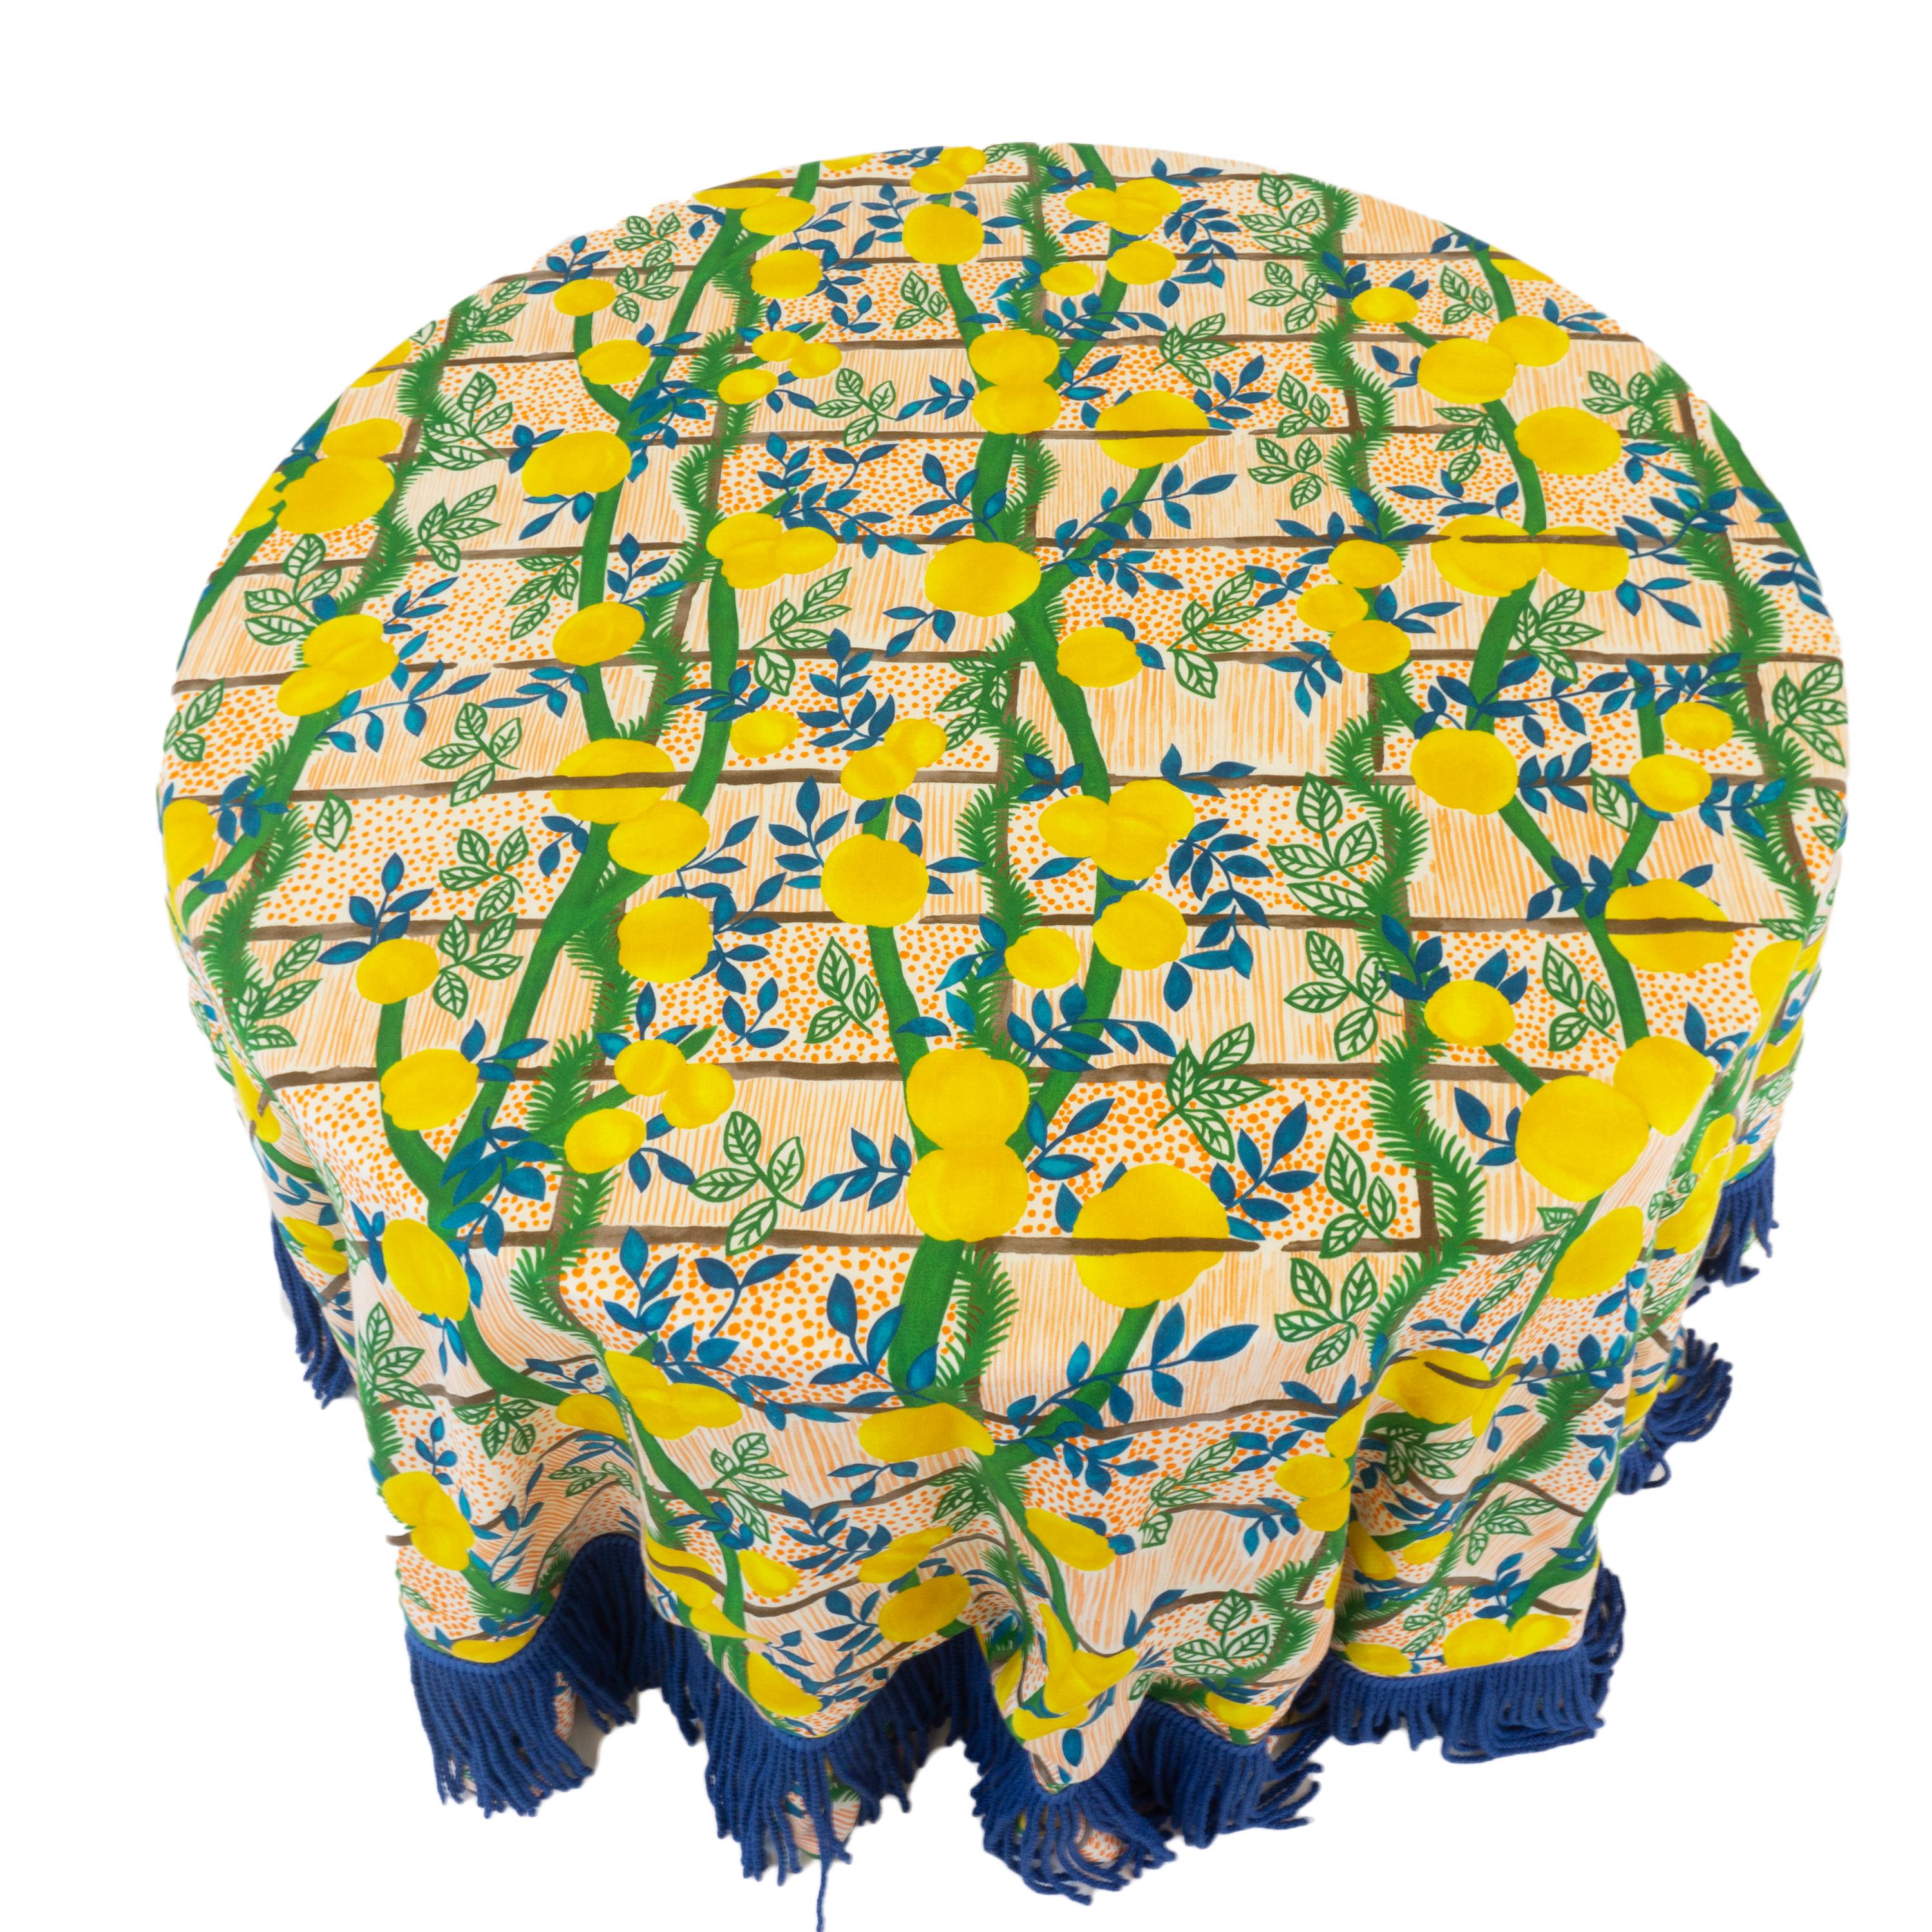 A hand sewn round table cloth in designer Jim Thompson fabric. The fabric features a cheery lemon garden pattern and is accented with a blue twisted fringe. Printed on 100% linen. Custom table cloths are available upon request. 

Table is sold